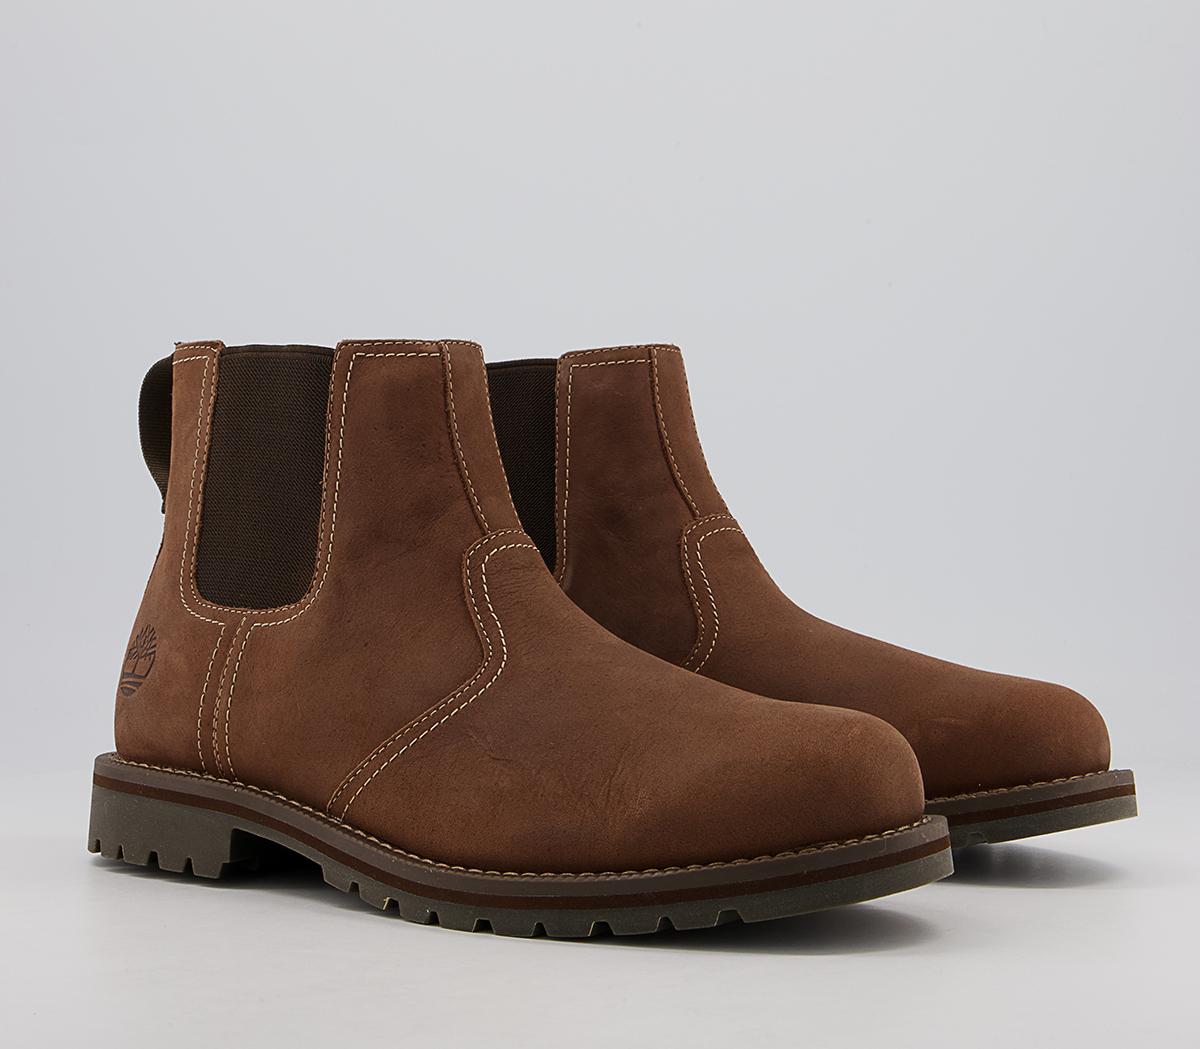 Timberland Mens Larchmont Chelsea Boots Mid Brown Leather, 8